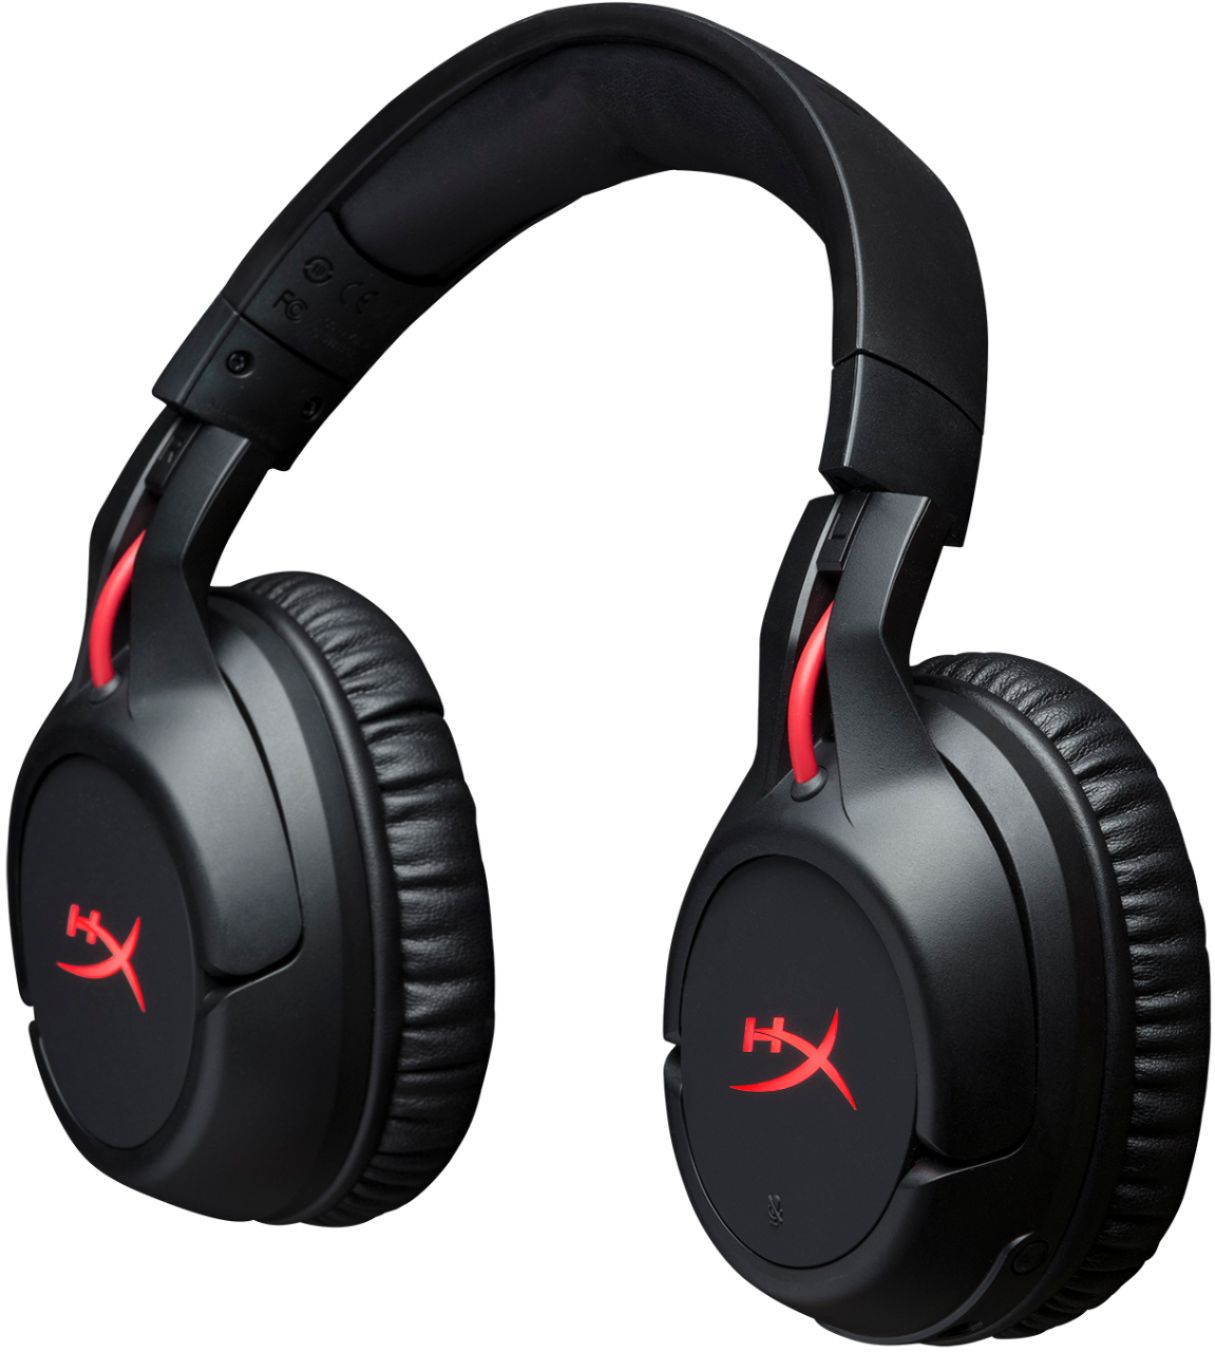 HyperX Gaming Flight for PC, Black and Headset Buy PS5, Wireless Cloud - Best 4P5L4AA#ABL/HX-HSCF-BK/AM PS4